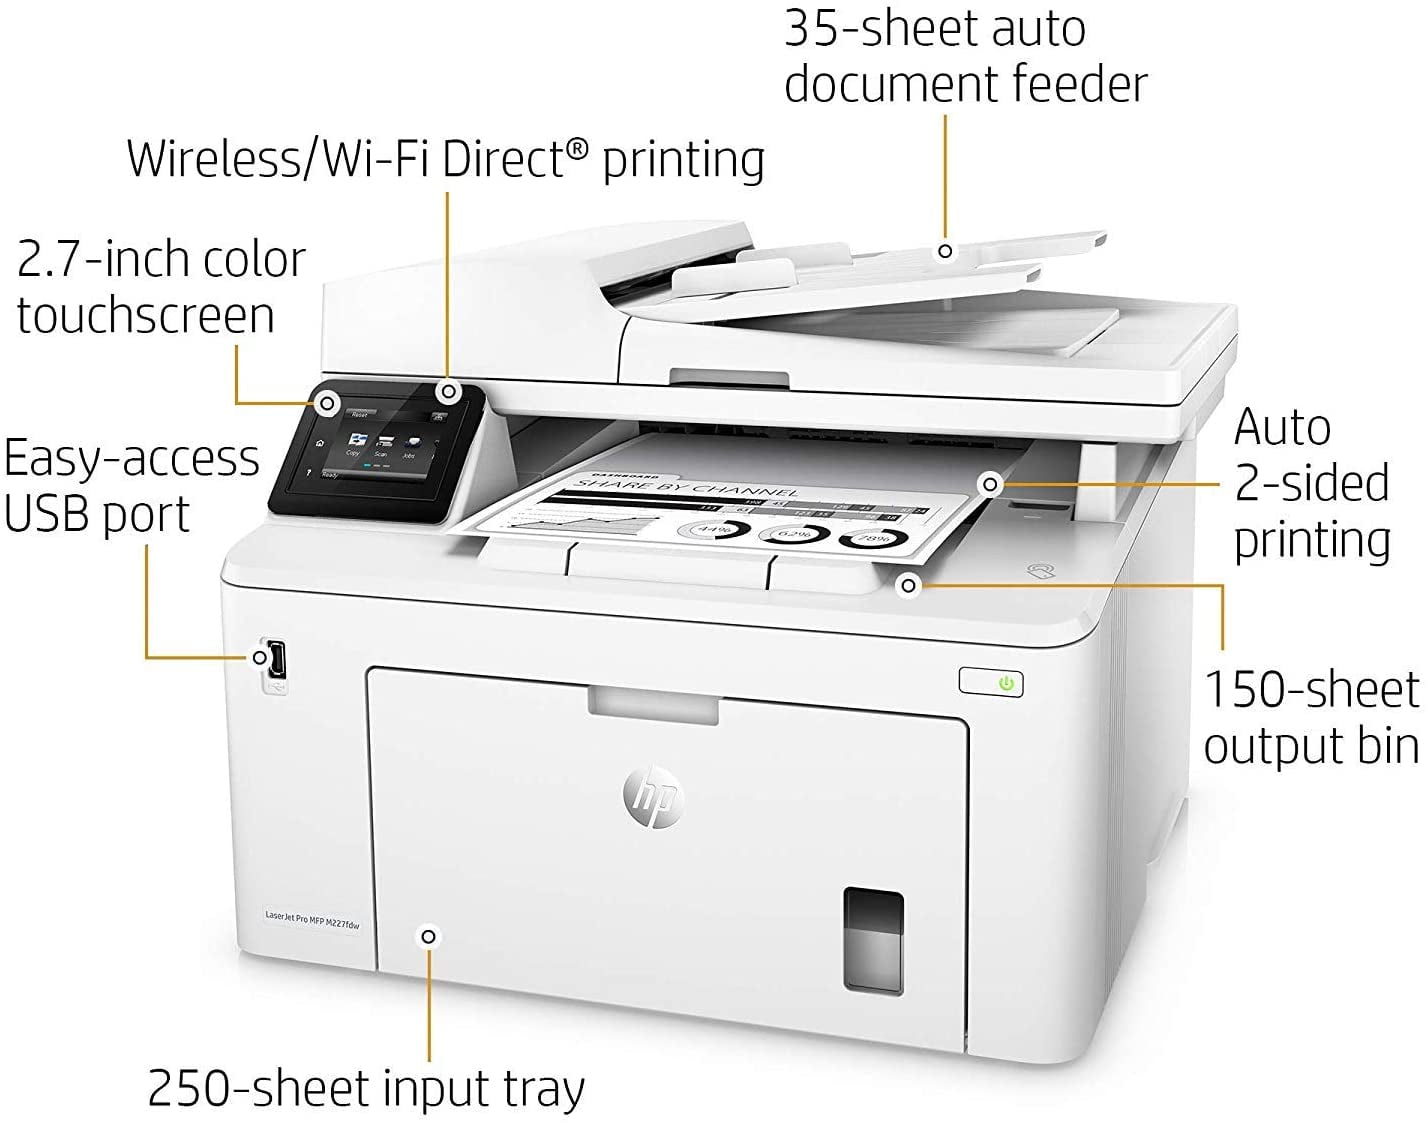 HP LaserJet Pro M227fdw Black-and-White All-In-One Laser Printer - (G3Q75A) Scan, Copy, Fax - Walmart.com